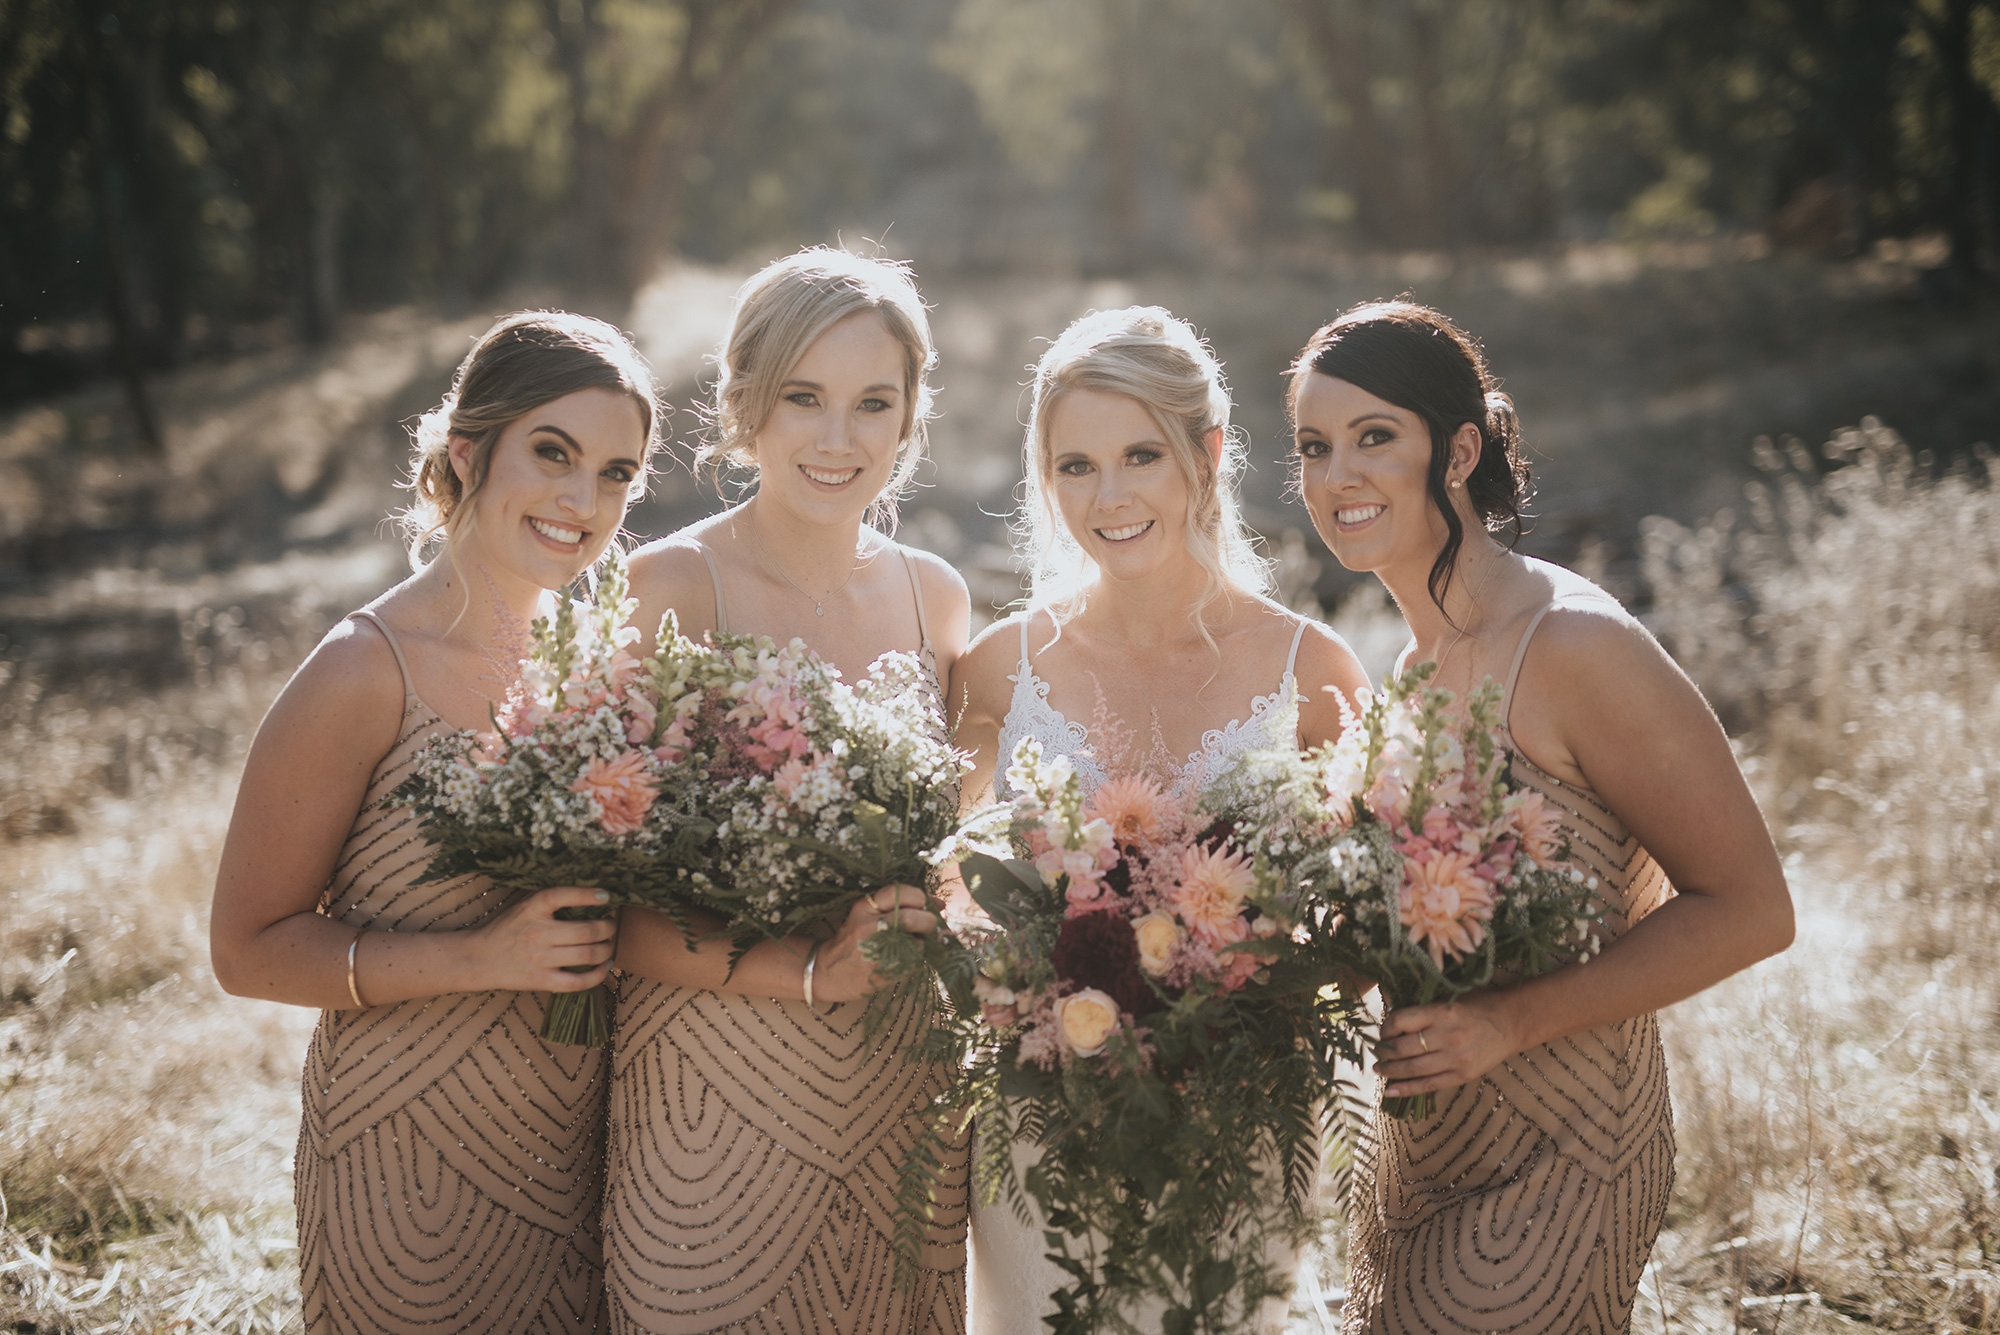 Kate_Tristan_Country-Rustic-Wedding_033